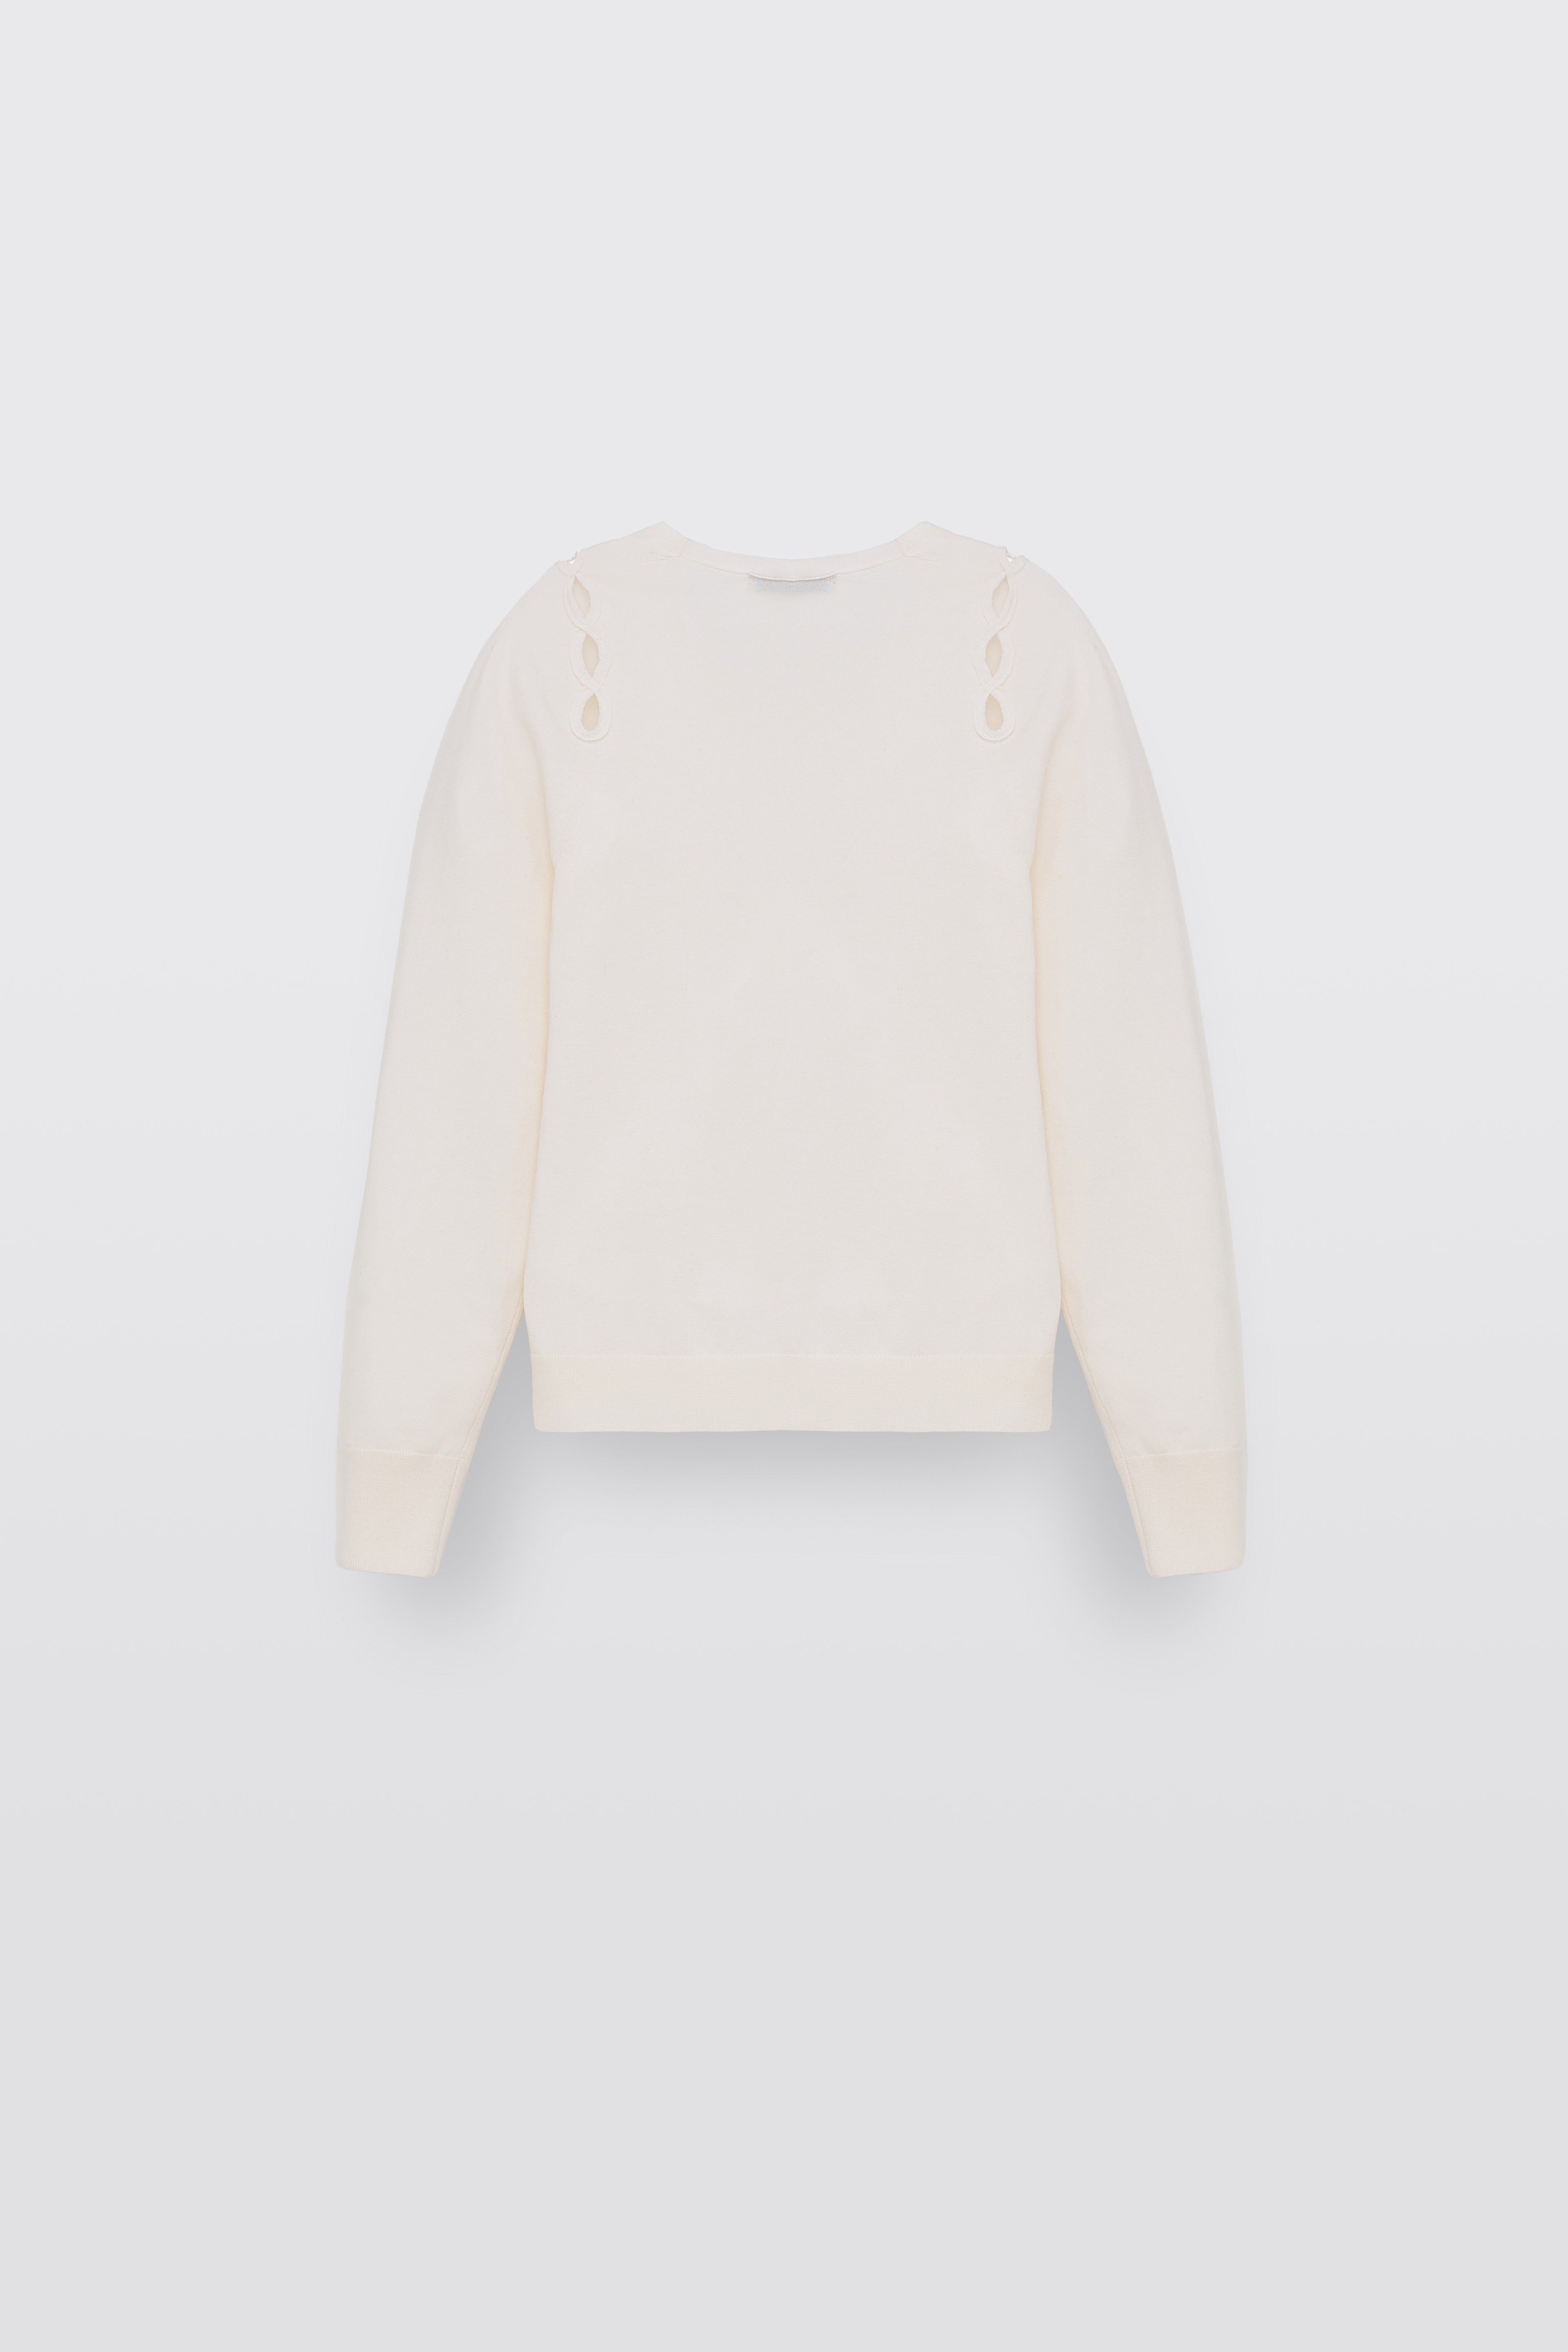 Dorothee-Schumacher-OUTLET-SALE-ESSENTIAL-EASE-pullover-Strick-2_2dcbc054-c515-4c38-bf31-64bc3e253242.jpg